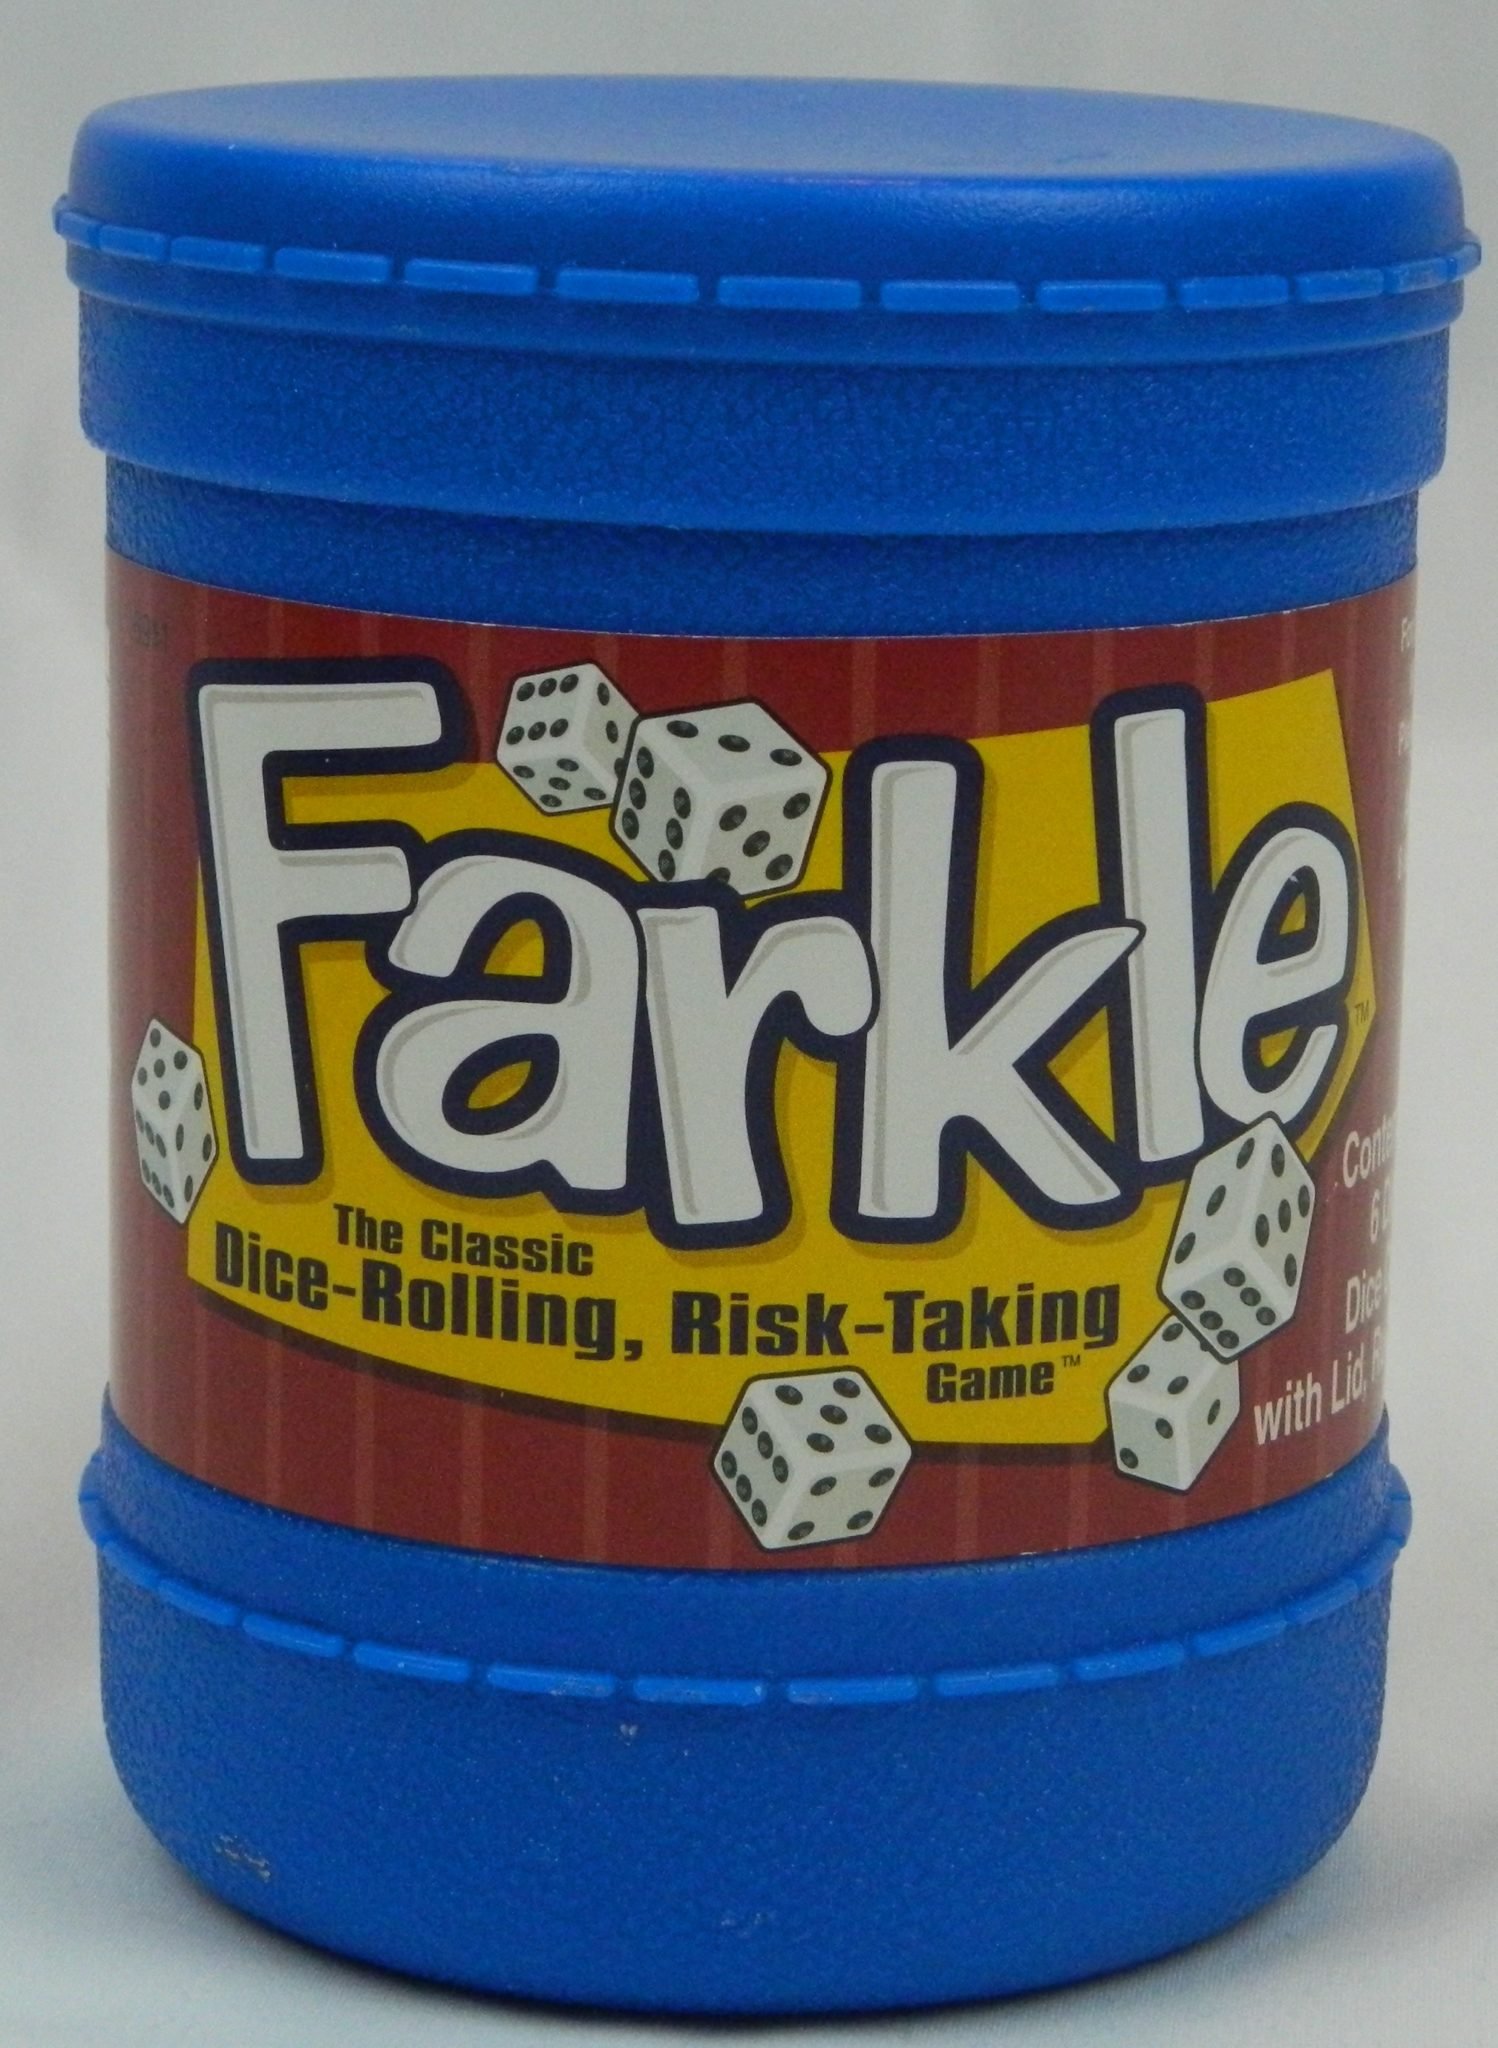 farkle-dice-game-review-and-rules-geeky-hobbies